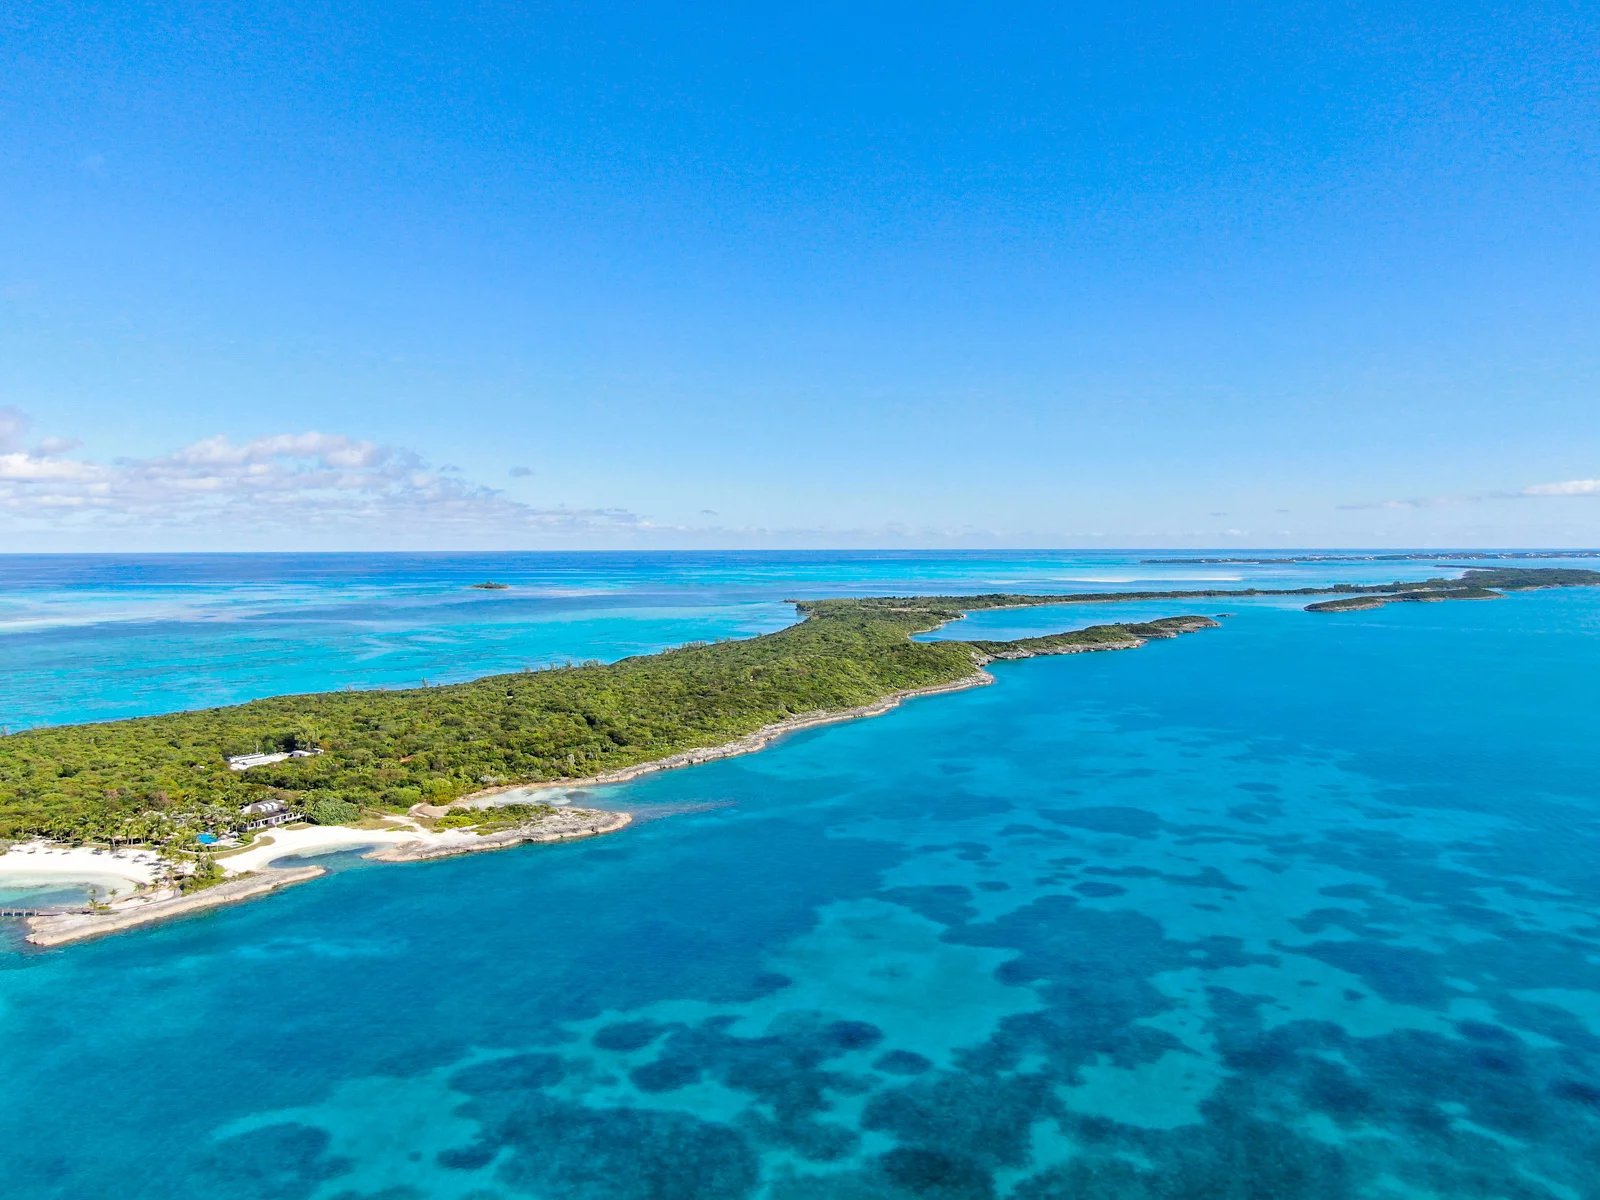 royal island, the perfect private island opportunity - mls 51444 image35